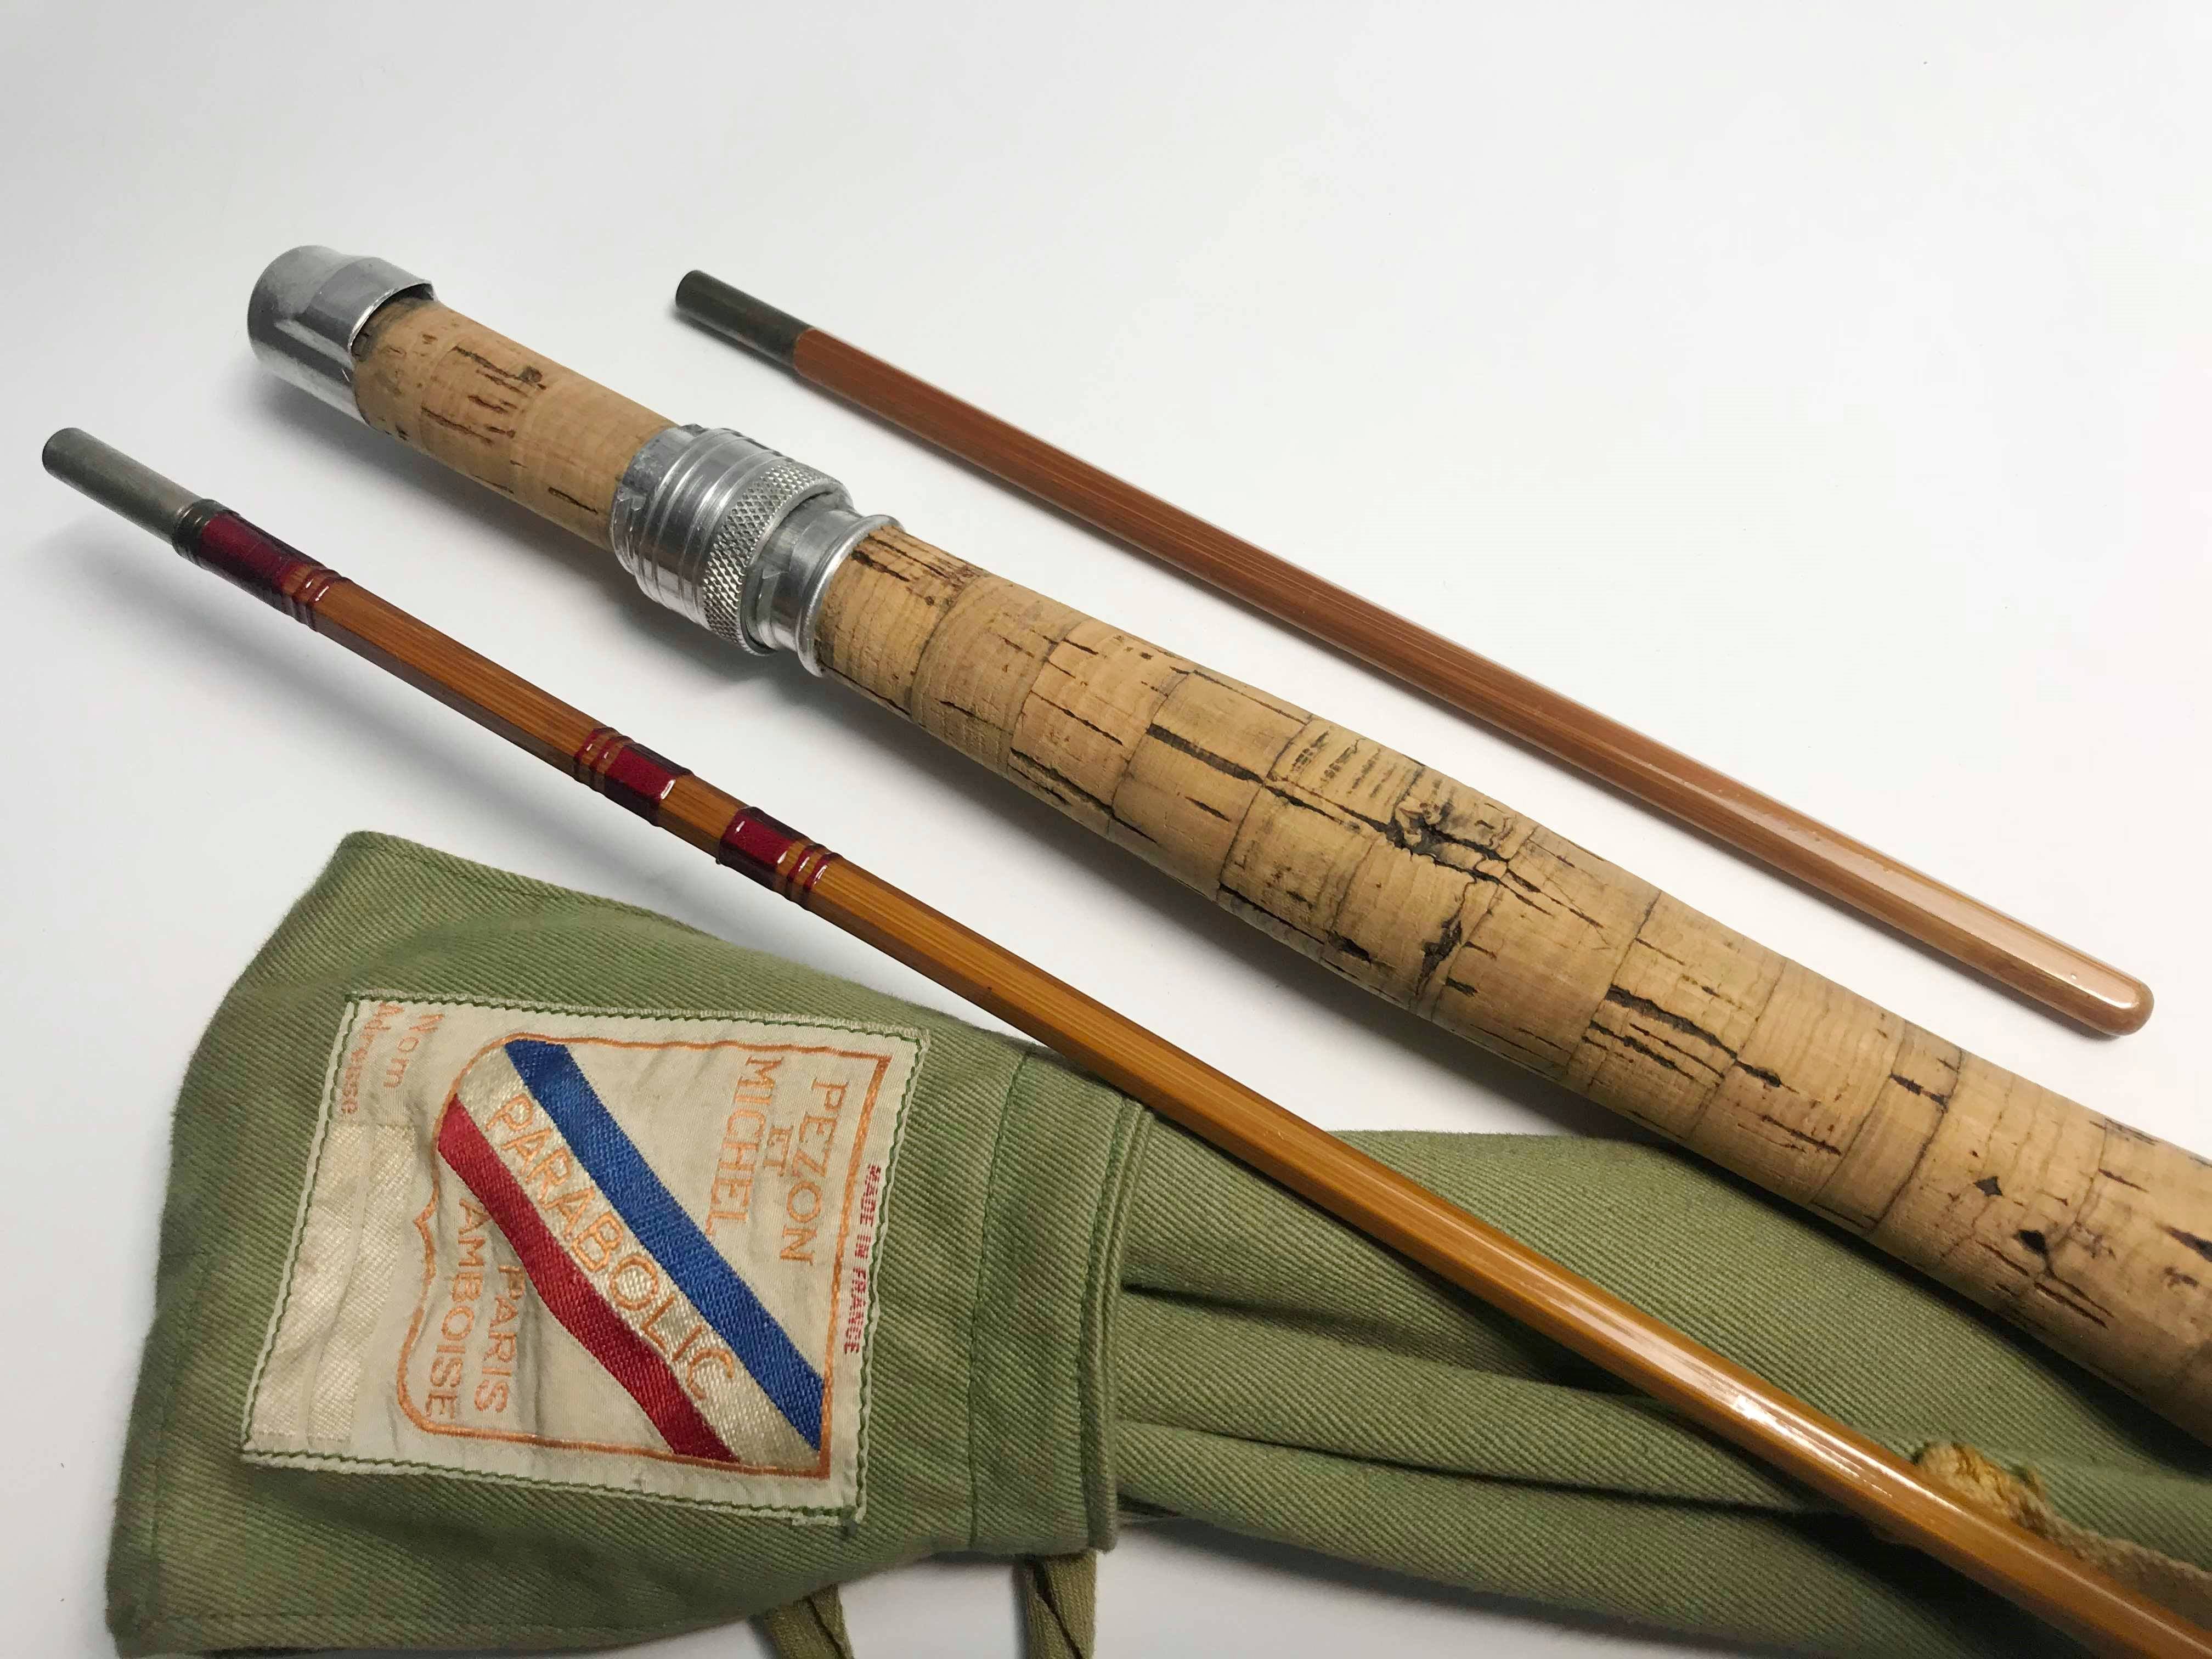 https://irelandsantiquefishingtackle.com/cdn/shop/products/pEZON_COMPETITOR_PARABOLIC_SPECIAL_FRENCH_VINTAGE_FISHING_ROD_2_4032x.jpg?v=1579771643